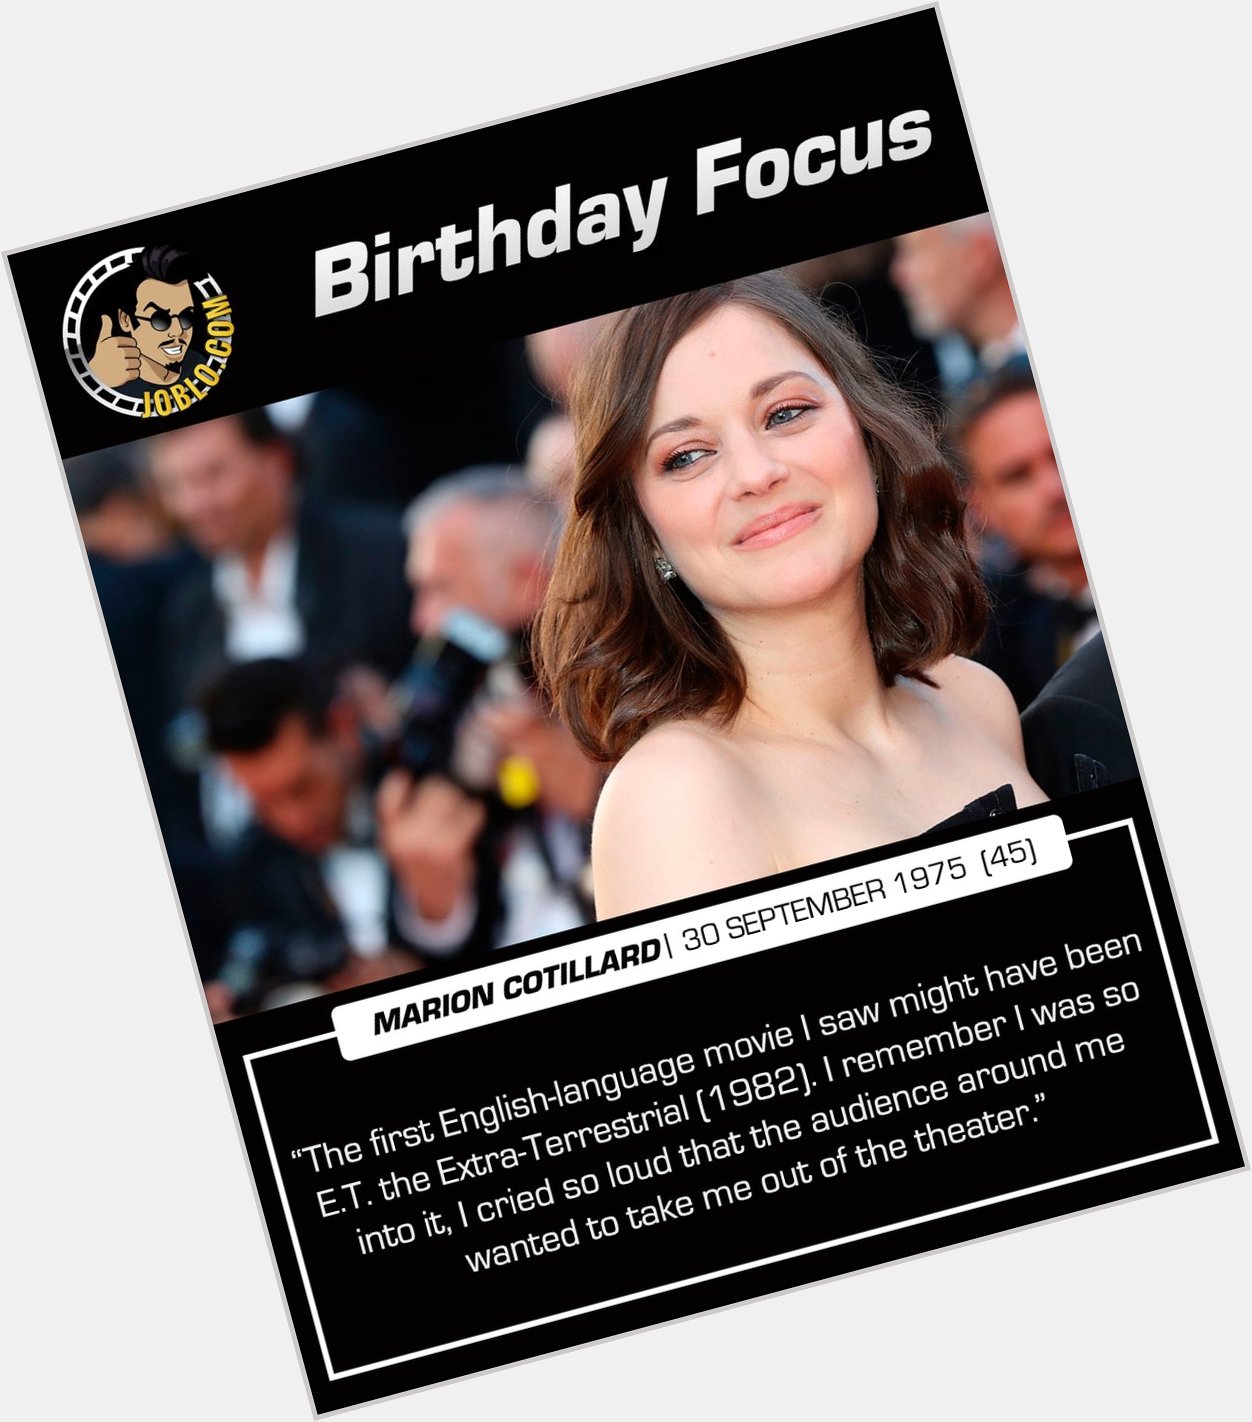 Happy 45th birthday to Marion Cotillard!

What is your favorite performance of hers? 